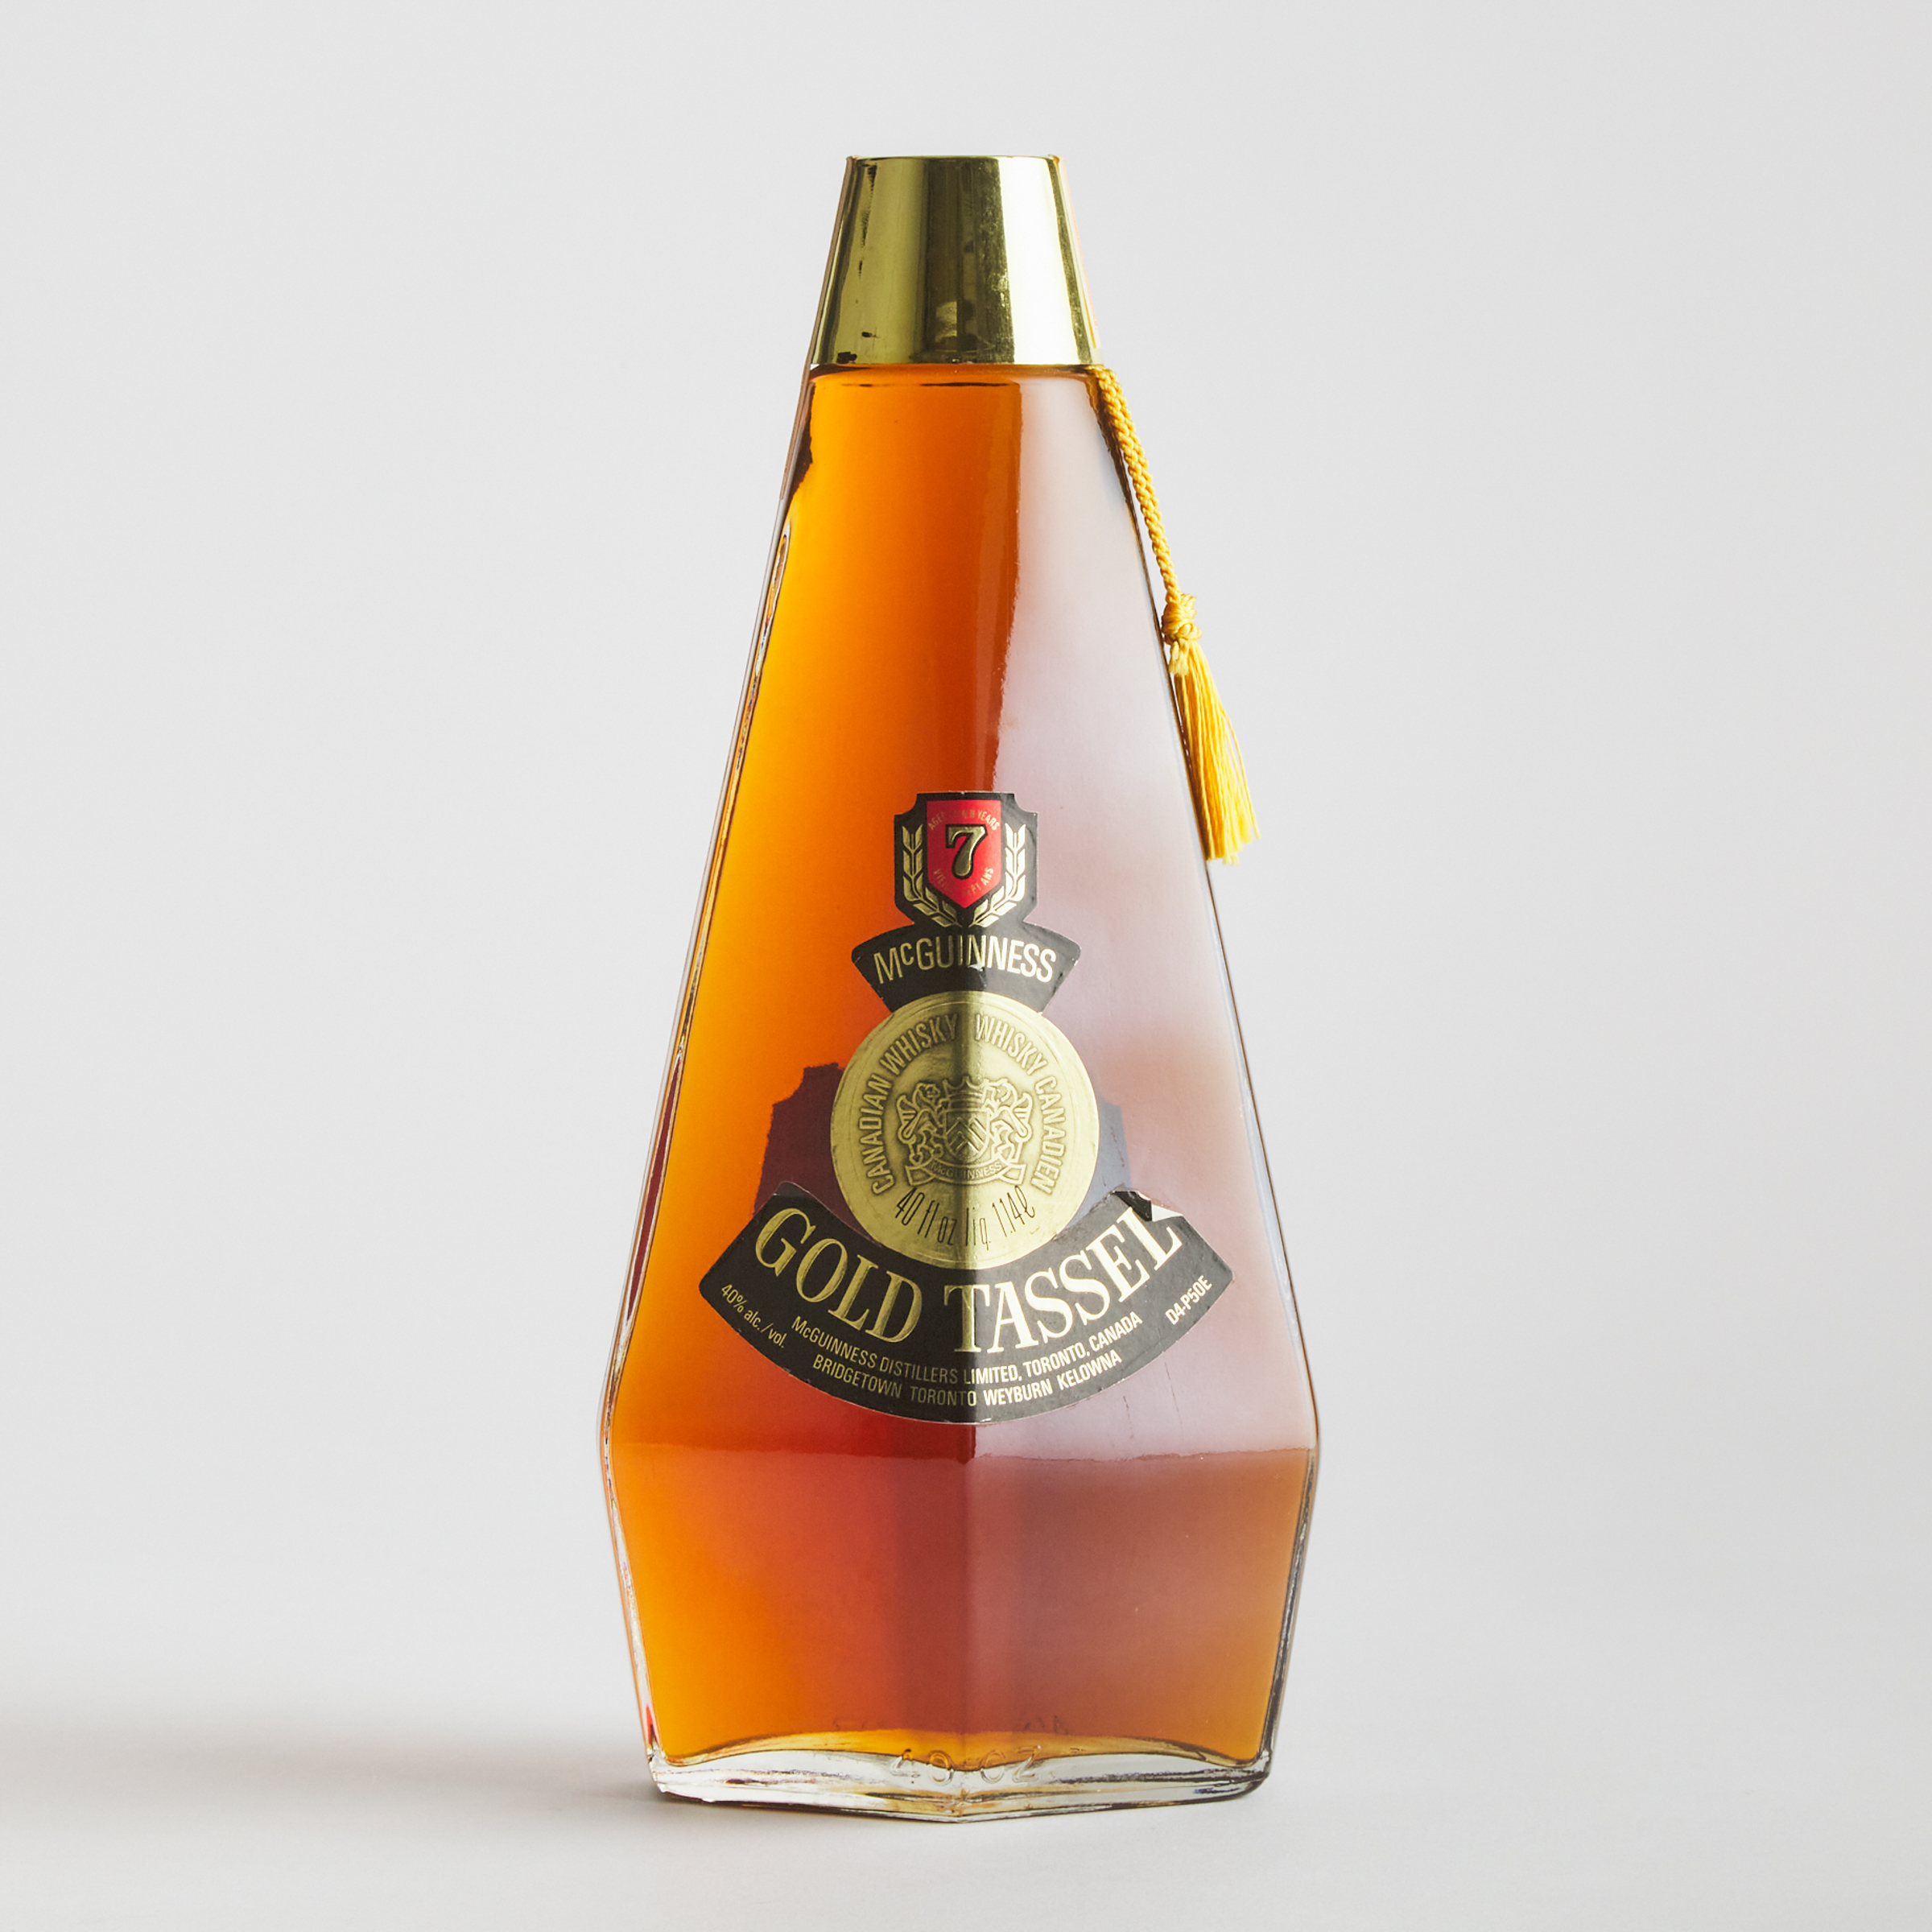 MCGUINESS GOLD TASSEL CANADIAN WHISKY 7 YEARS (ONE 1140 ML)